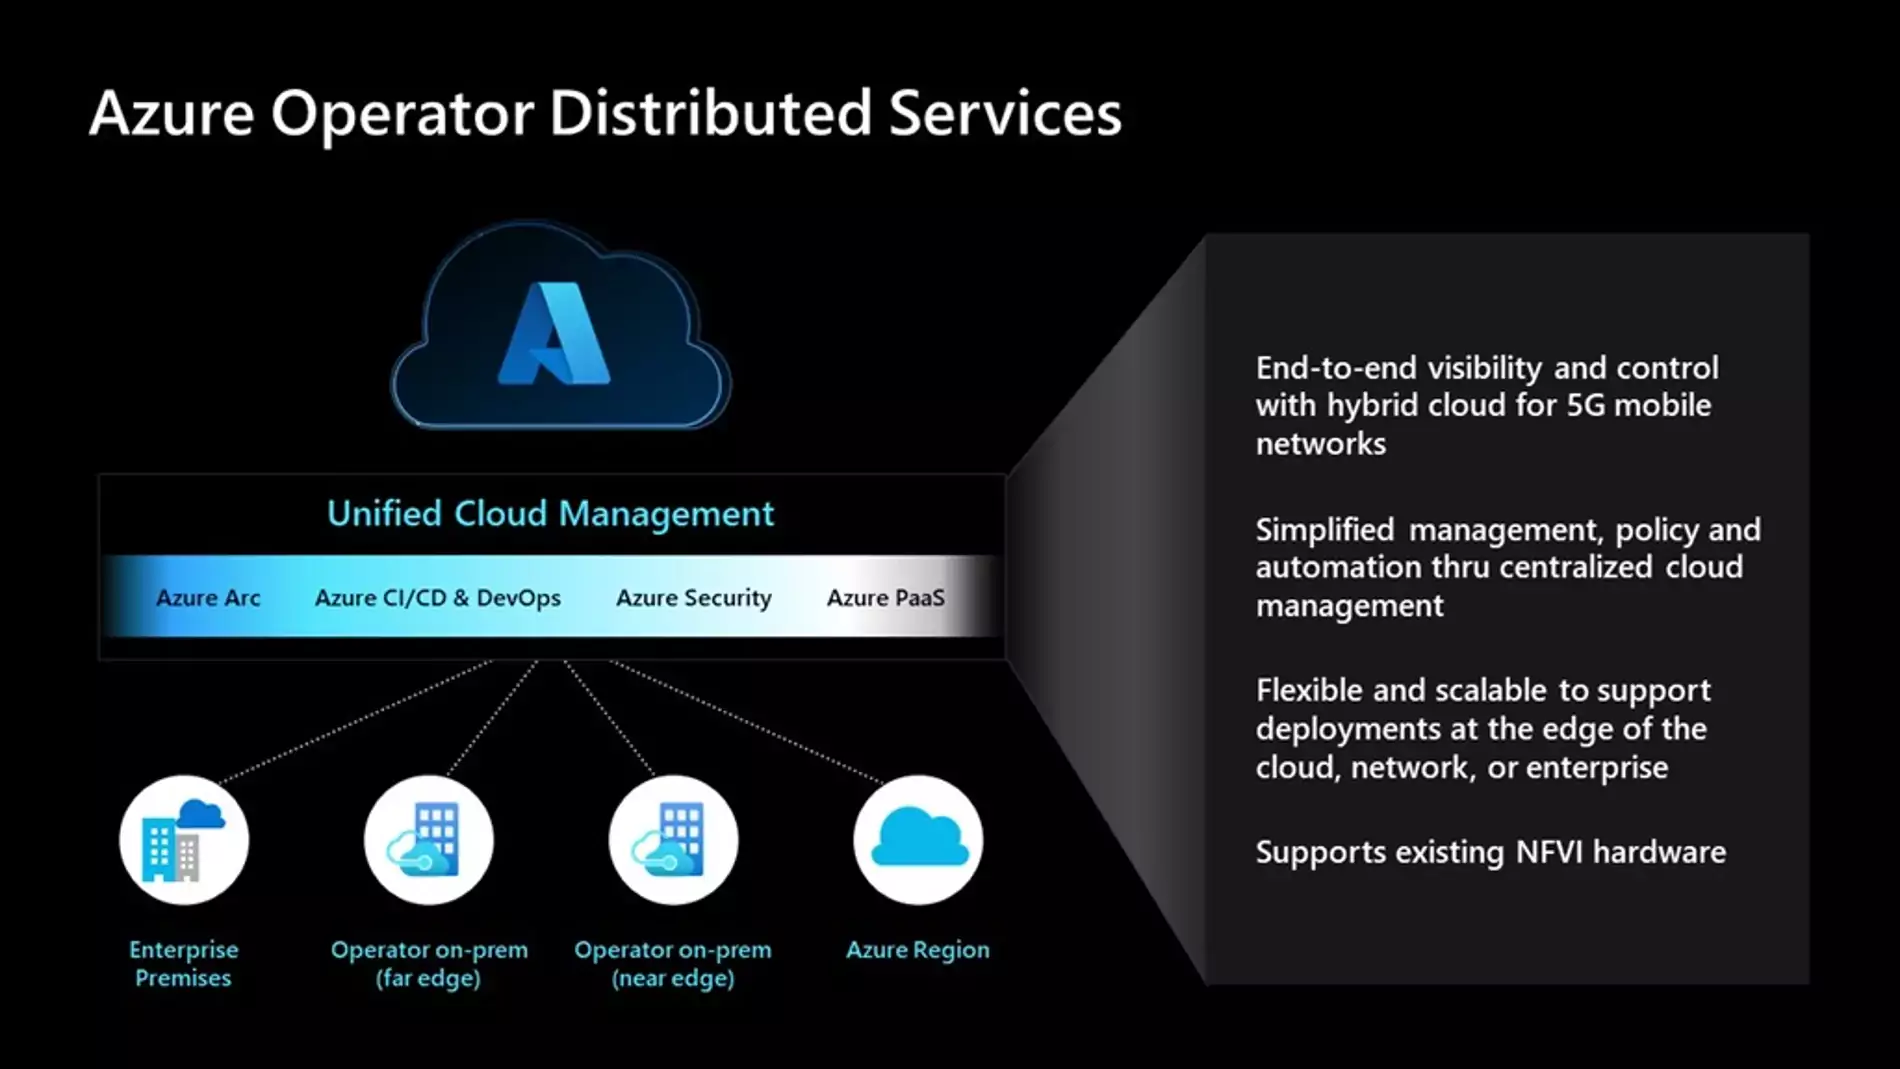 Azure Operator Distributed Services